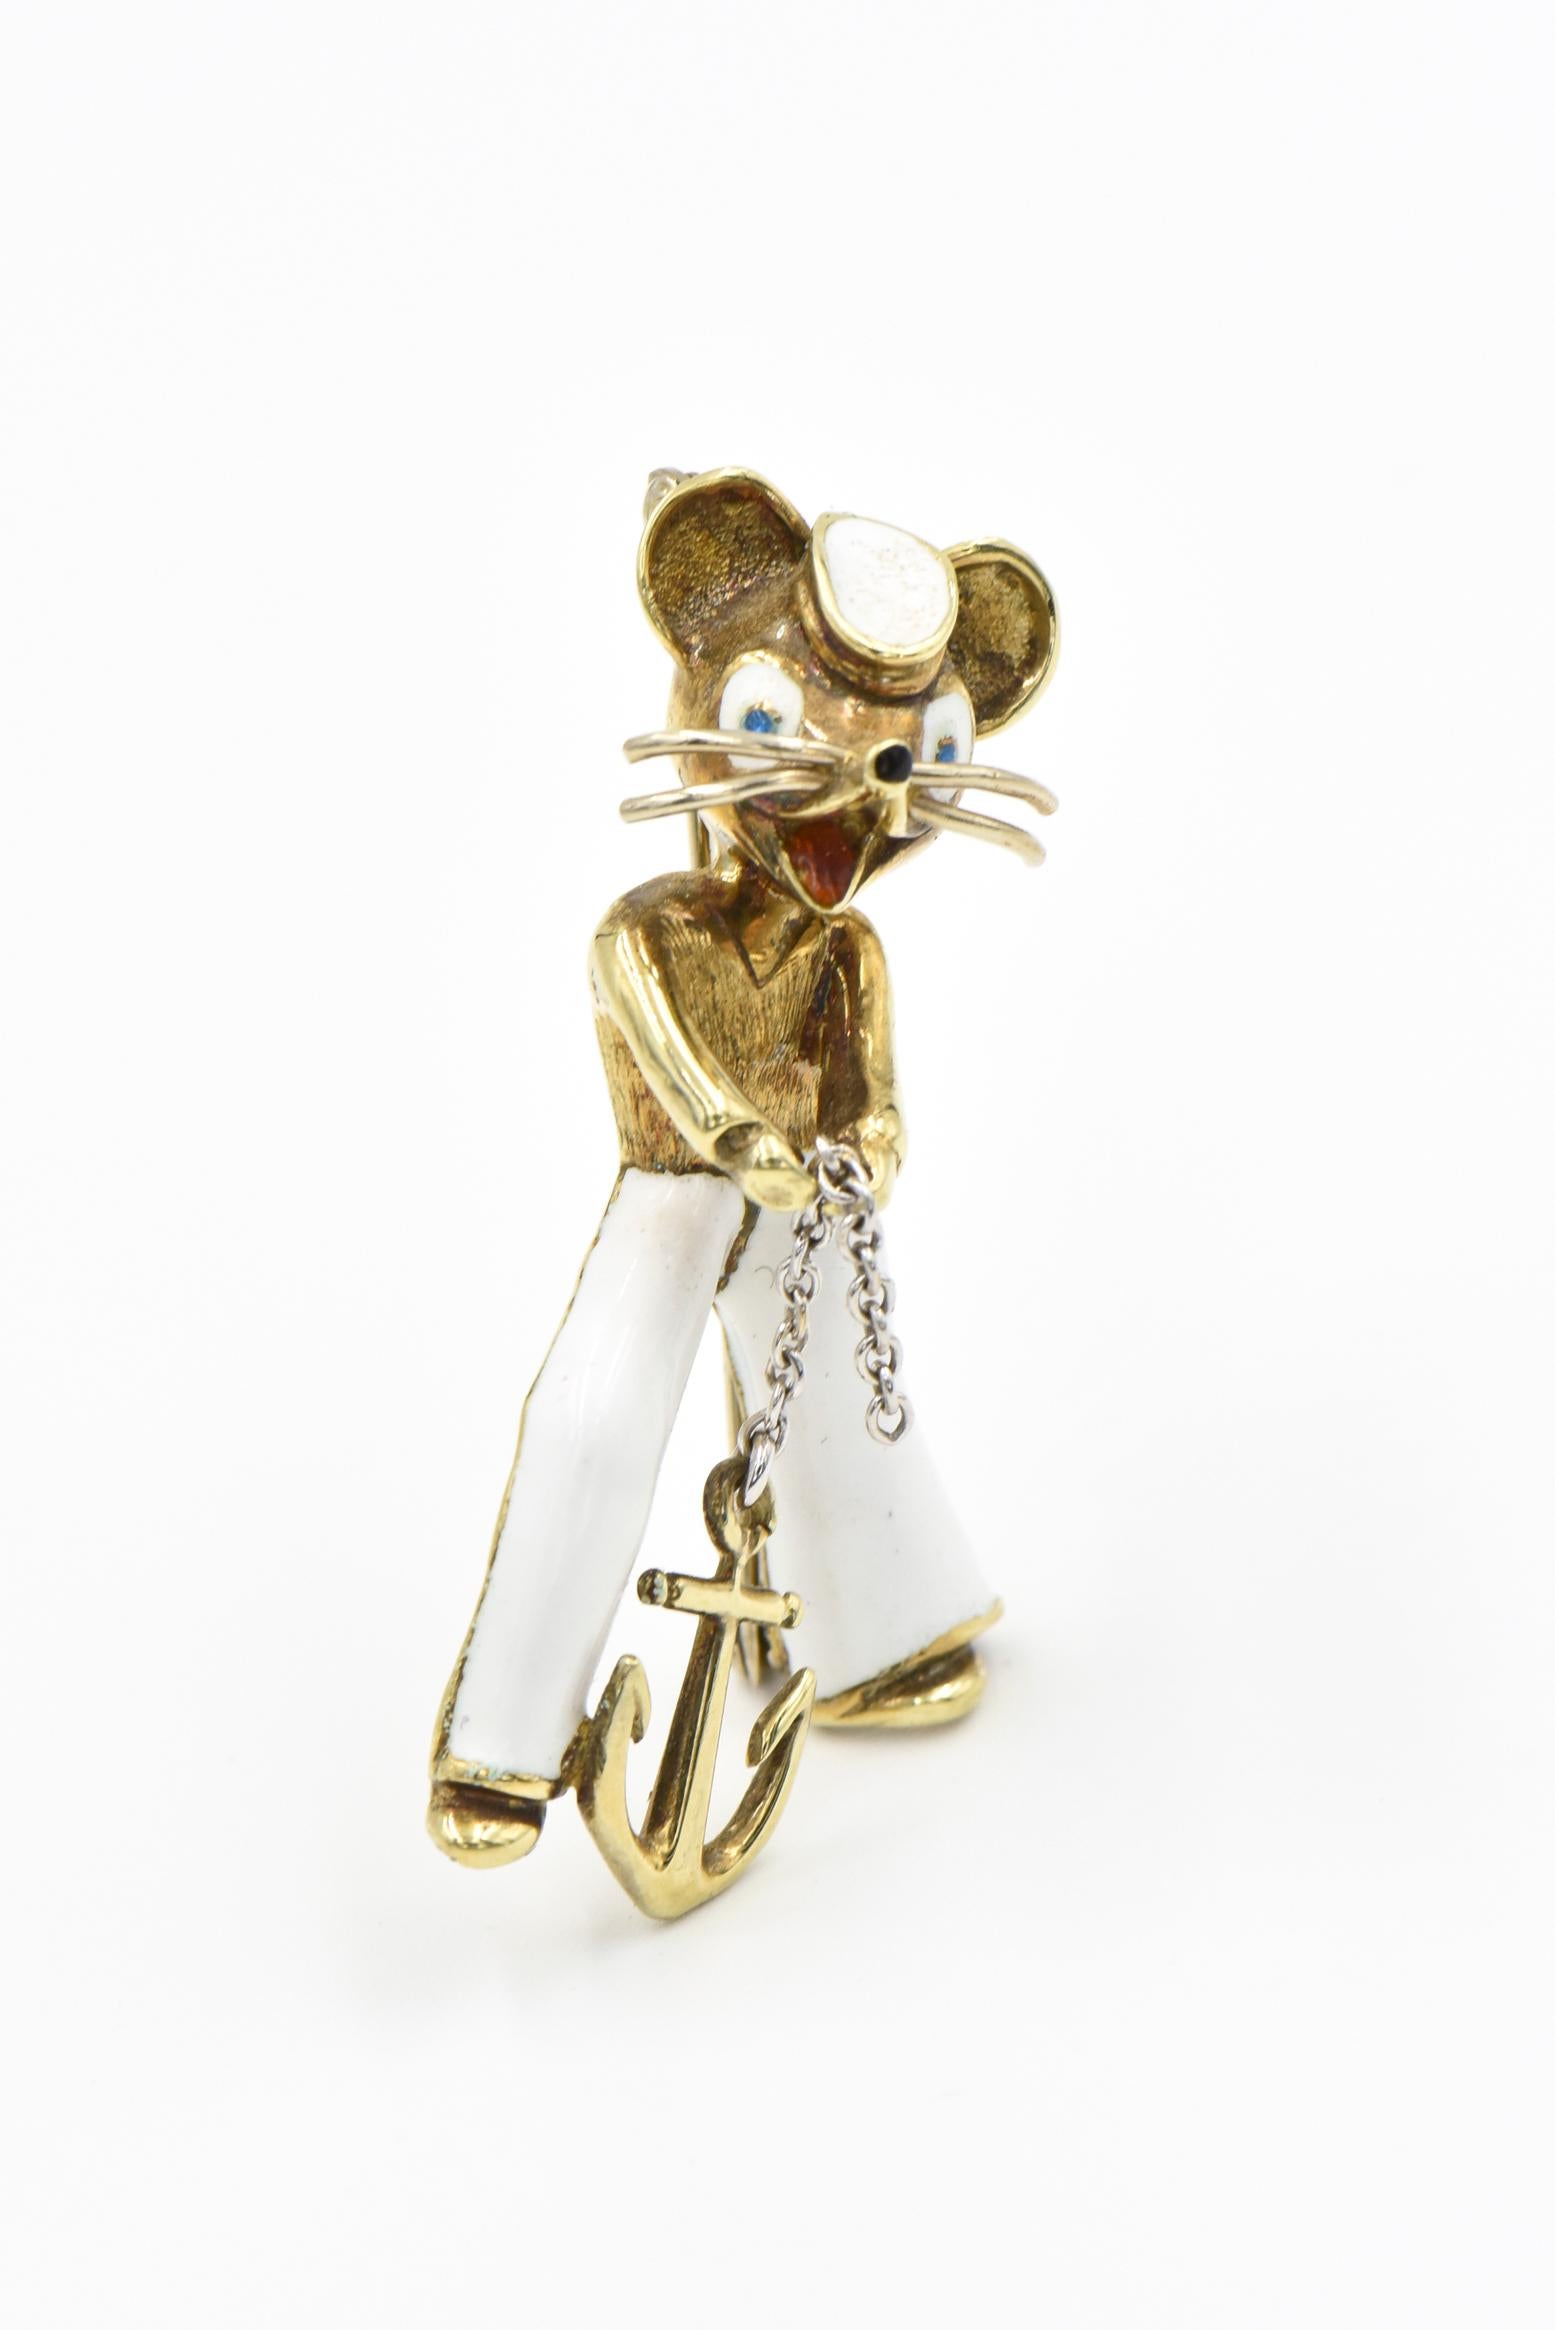 This fantastic mouse was produced by Martine in Italy in late 20th century.  The enamel mouse sailor is wearing white pants with a matching white cap.  He is holding a loose chain which is attached to a gold anchor.  His eyes, nose and mouth are